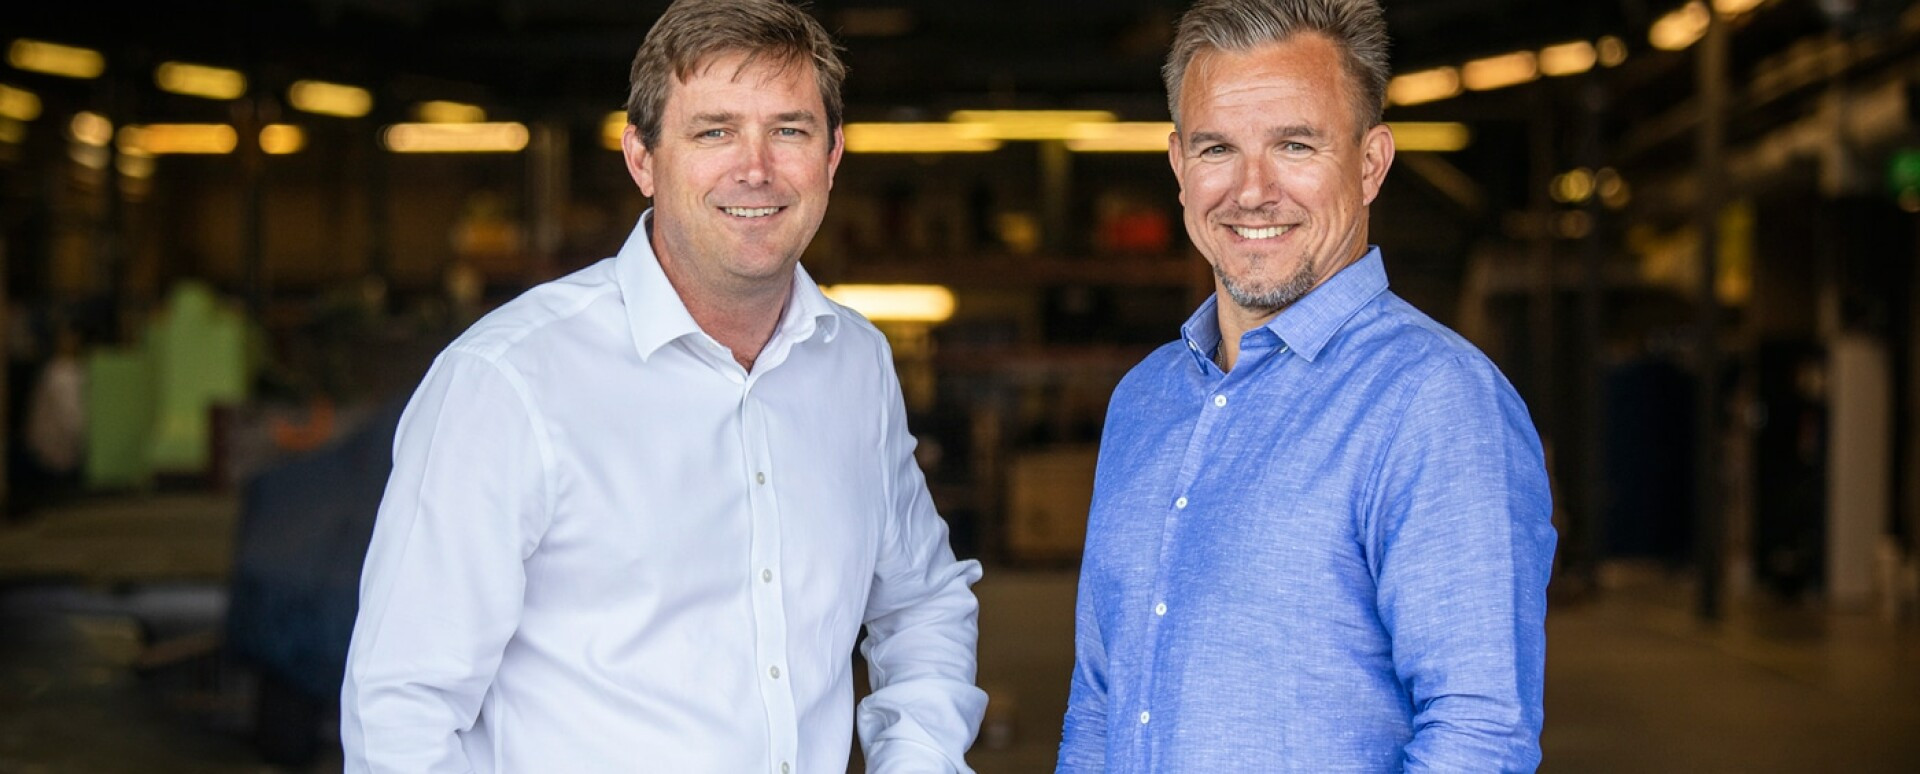                                                                                                     New CEO for Baltic Yachts
                                                                                            